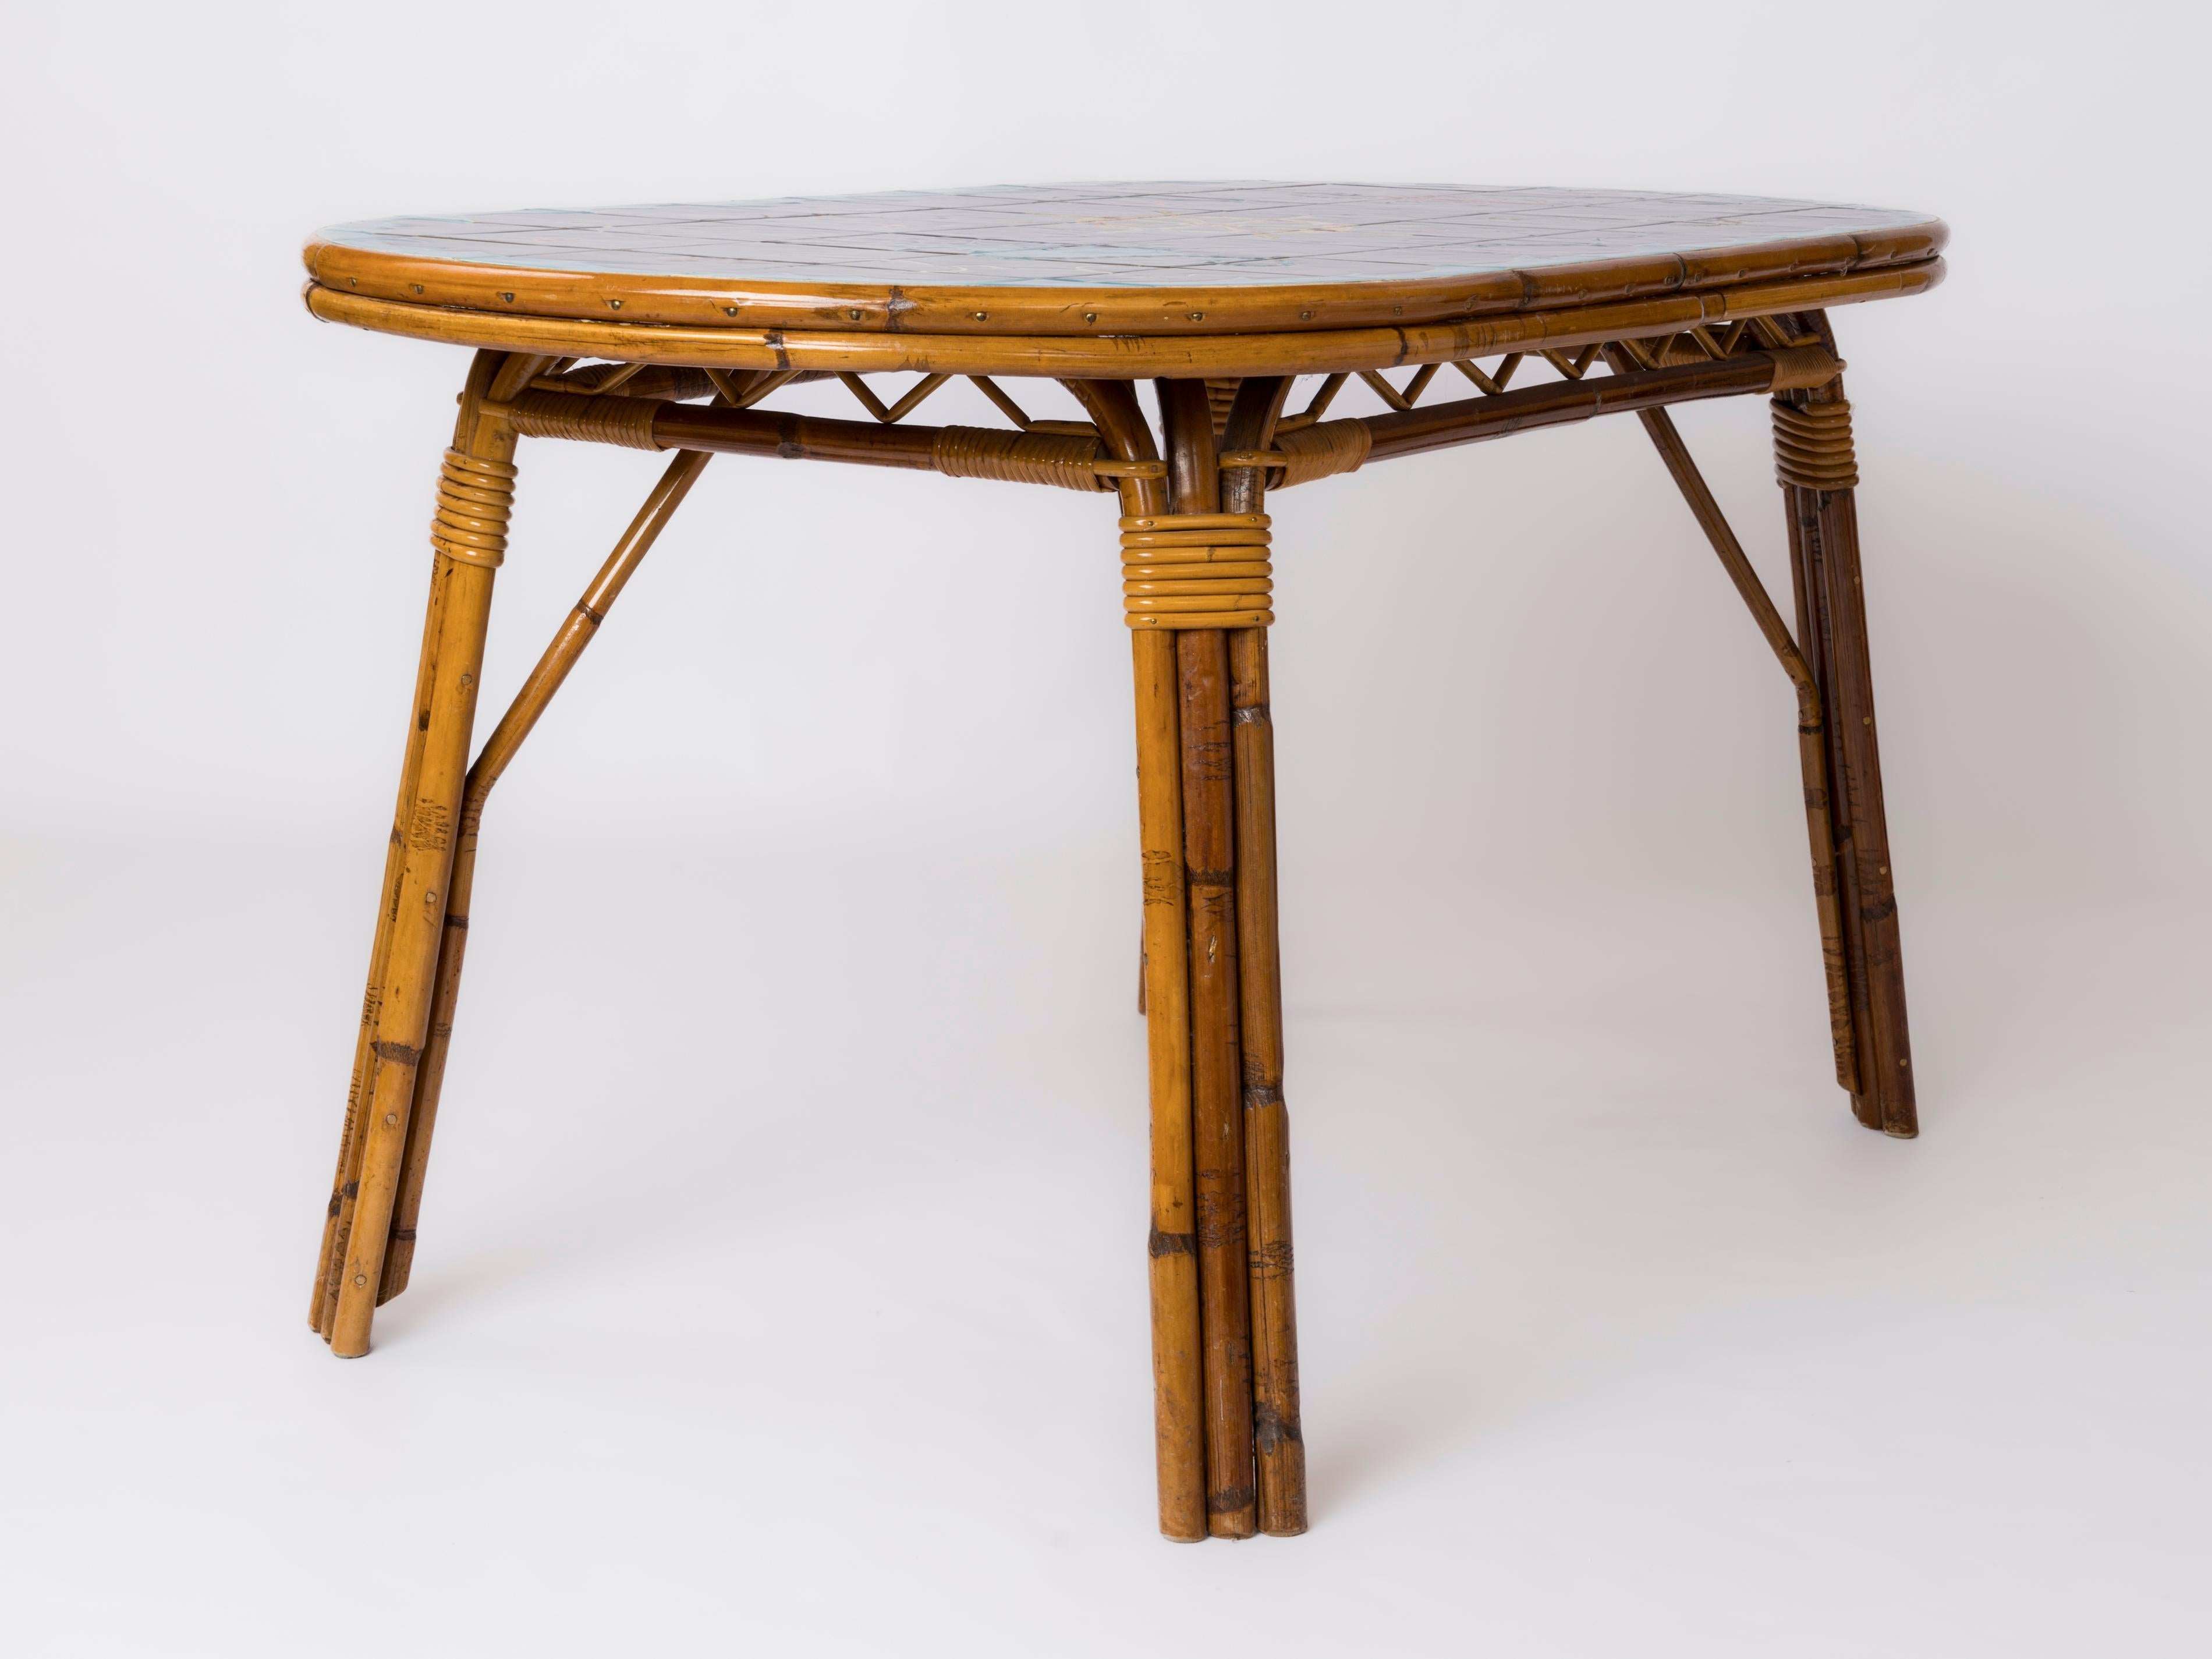 Mid-20th Century Ceramic Tiles & Rattan Dining Table by Adoux Minnet & Georges Chassin - 1960's For Sale